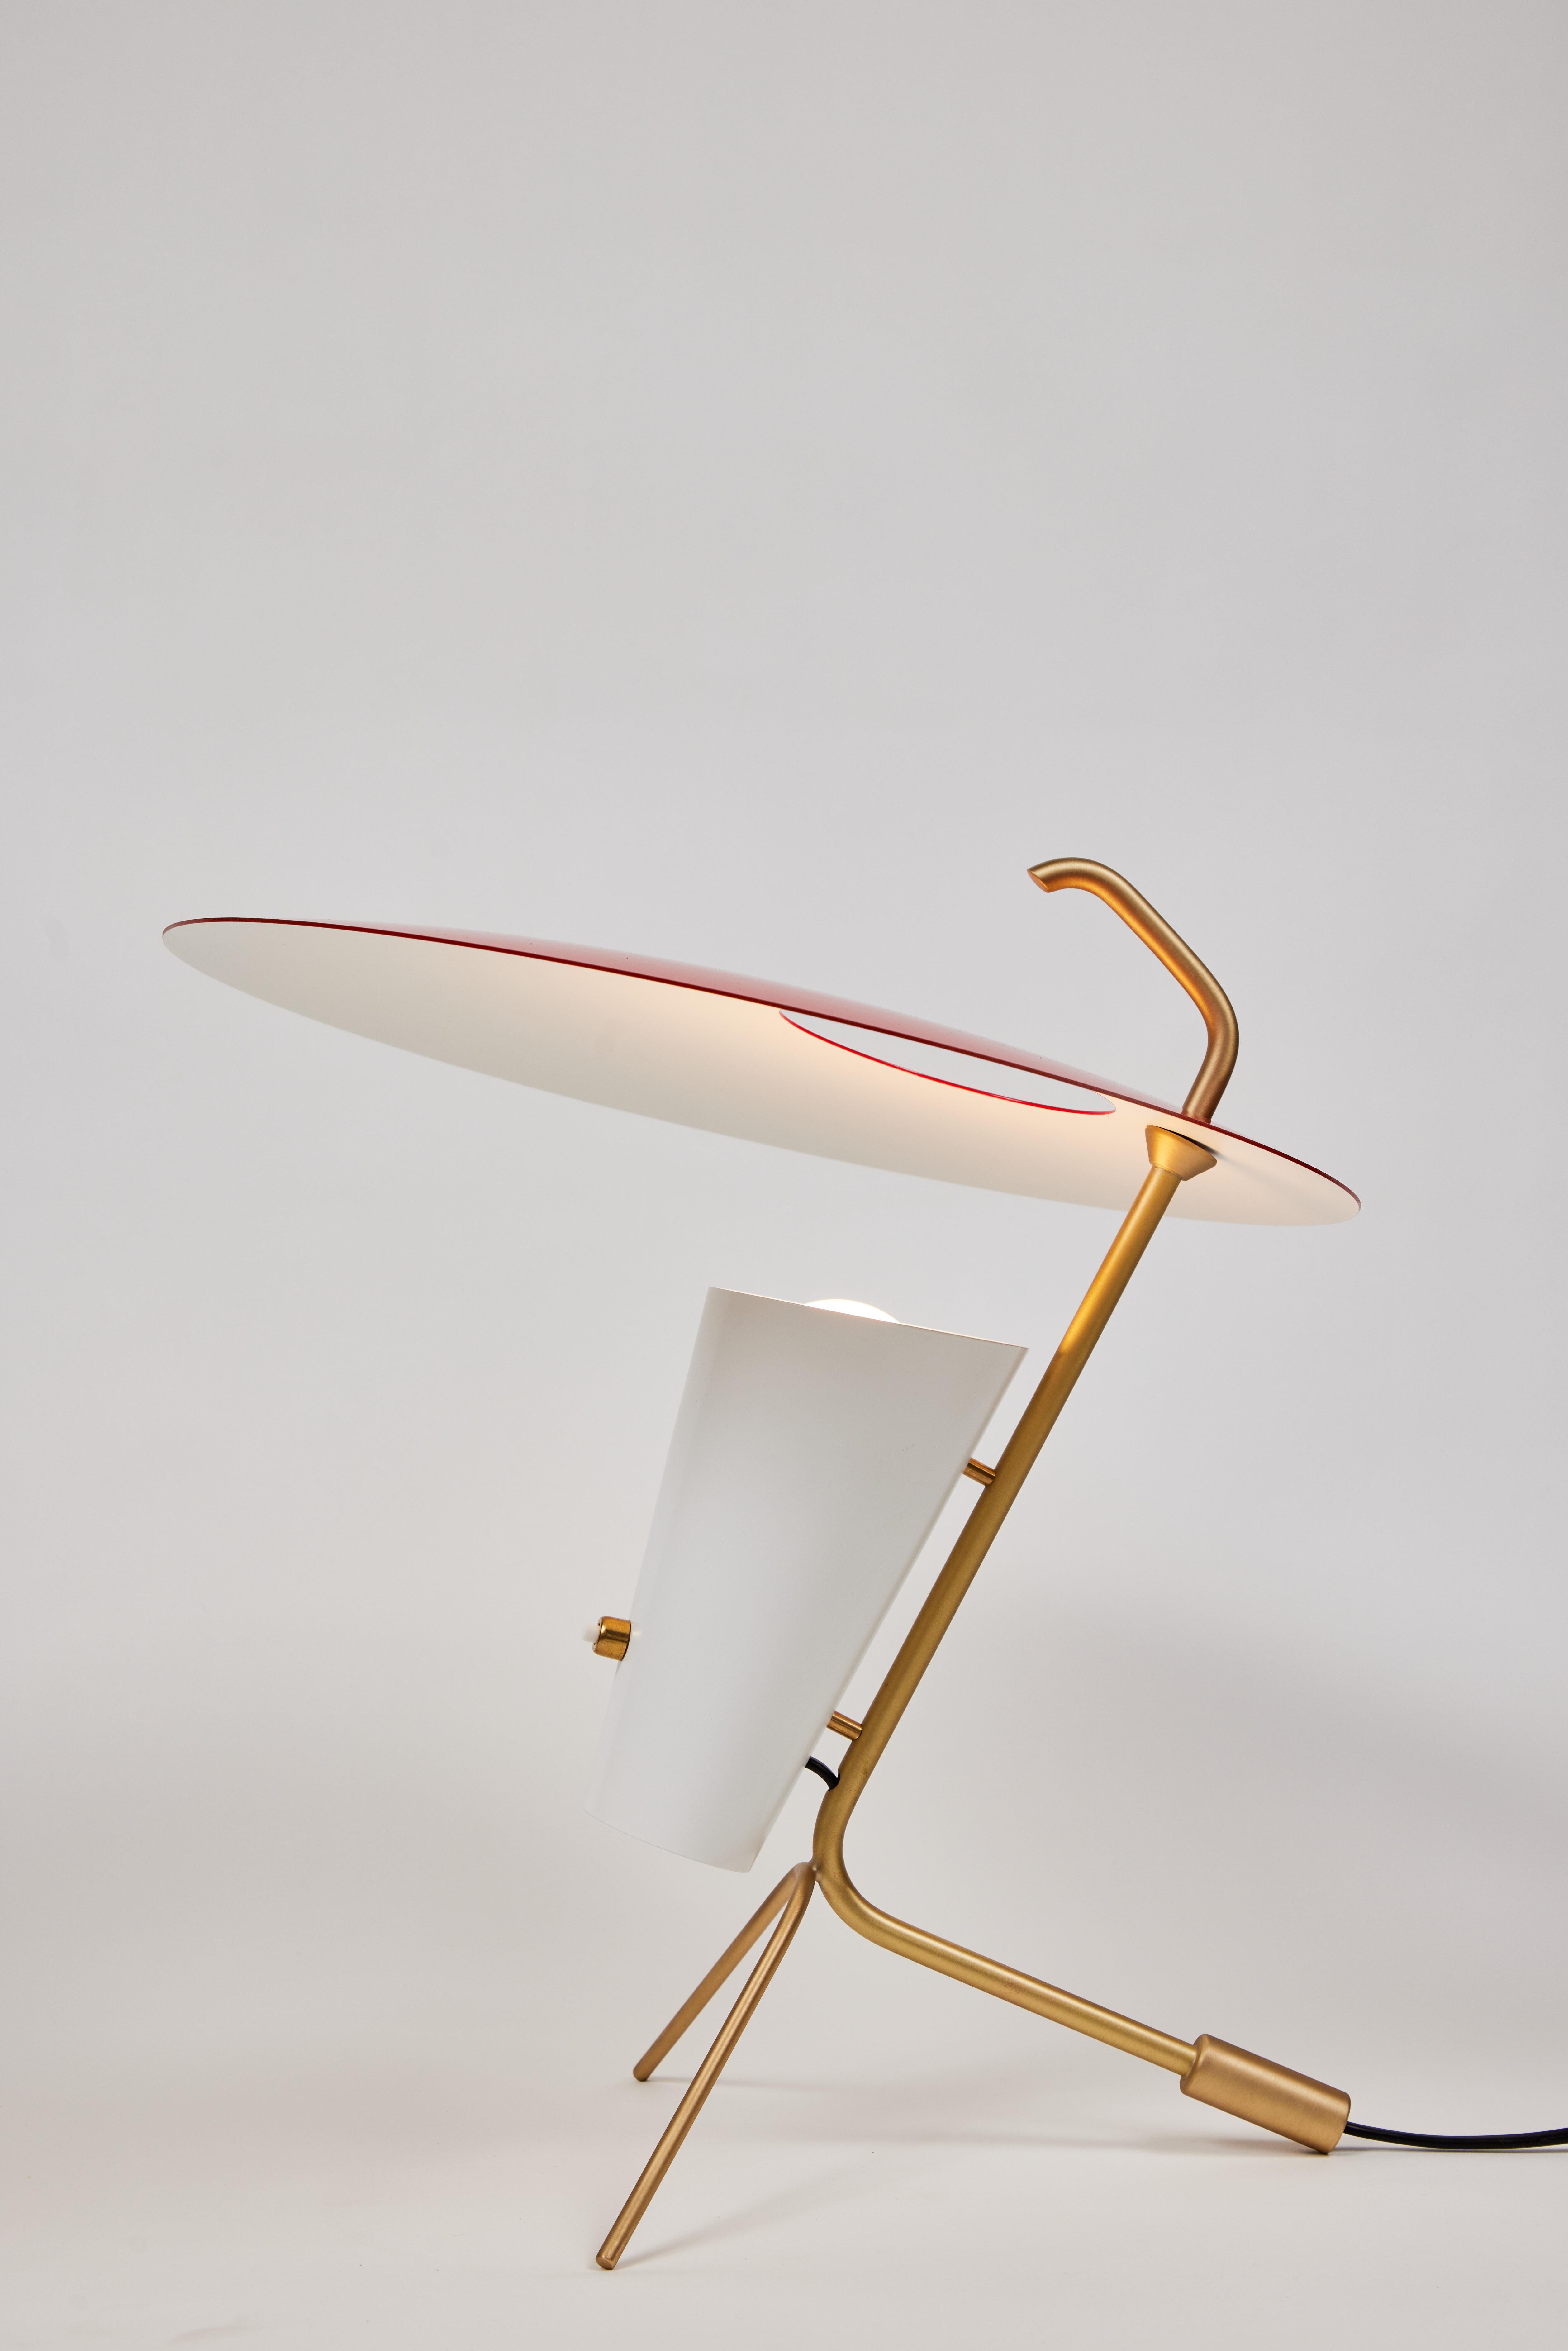 Metal Pierre Guariche G24 Table Lamp in Red and White for Sammode Studio For Sale